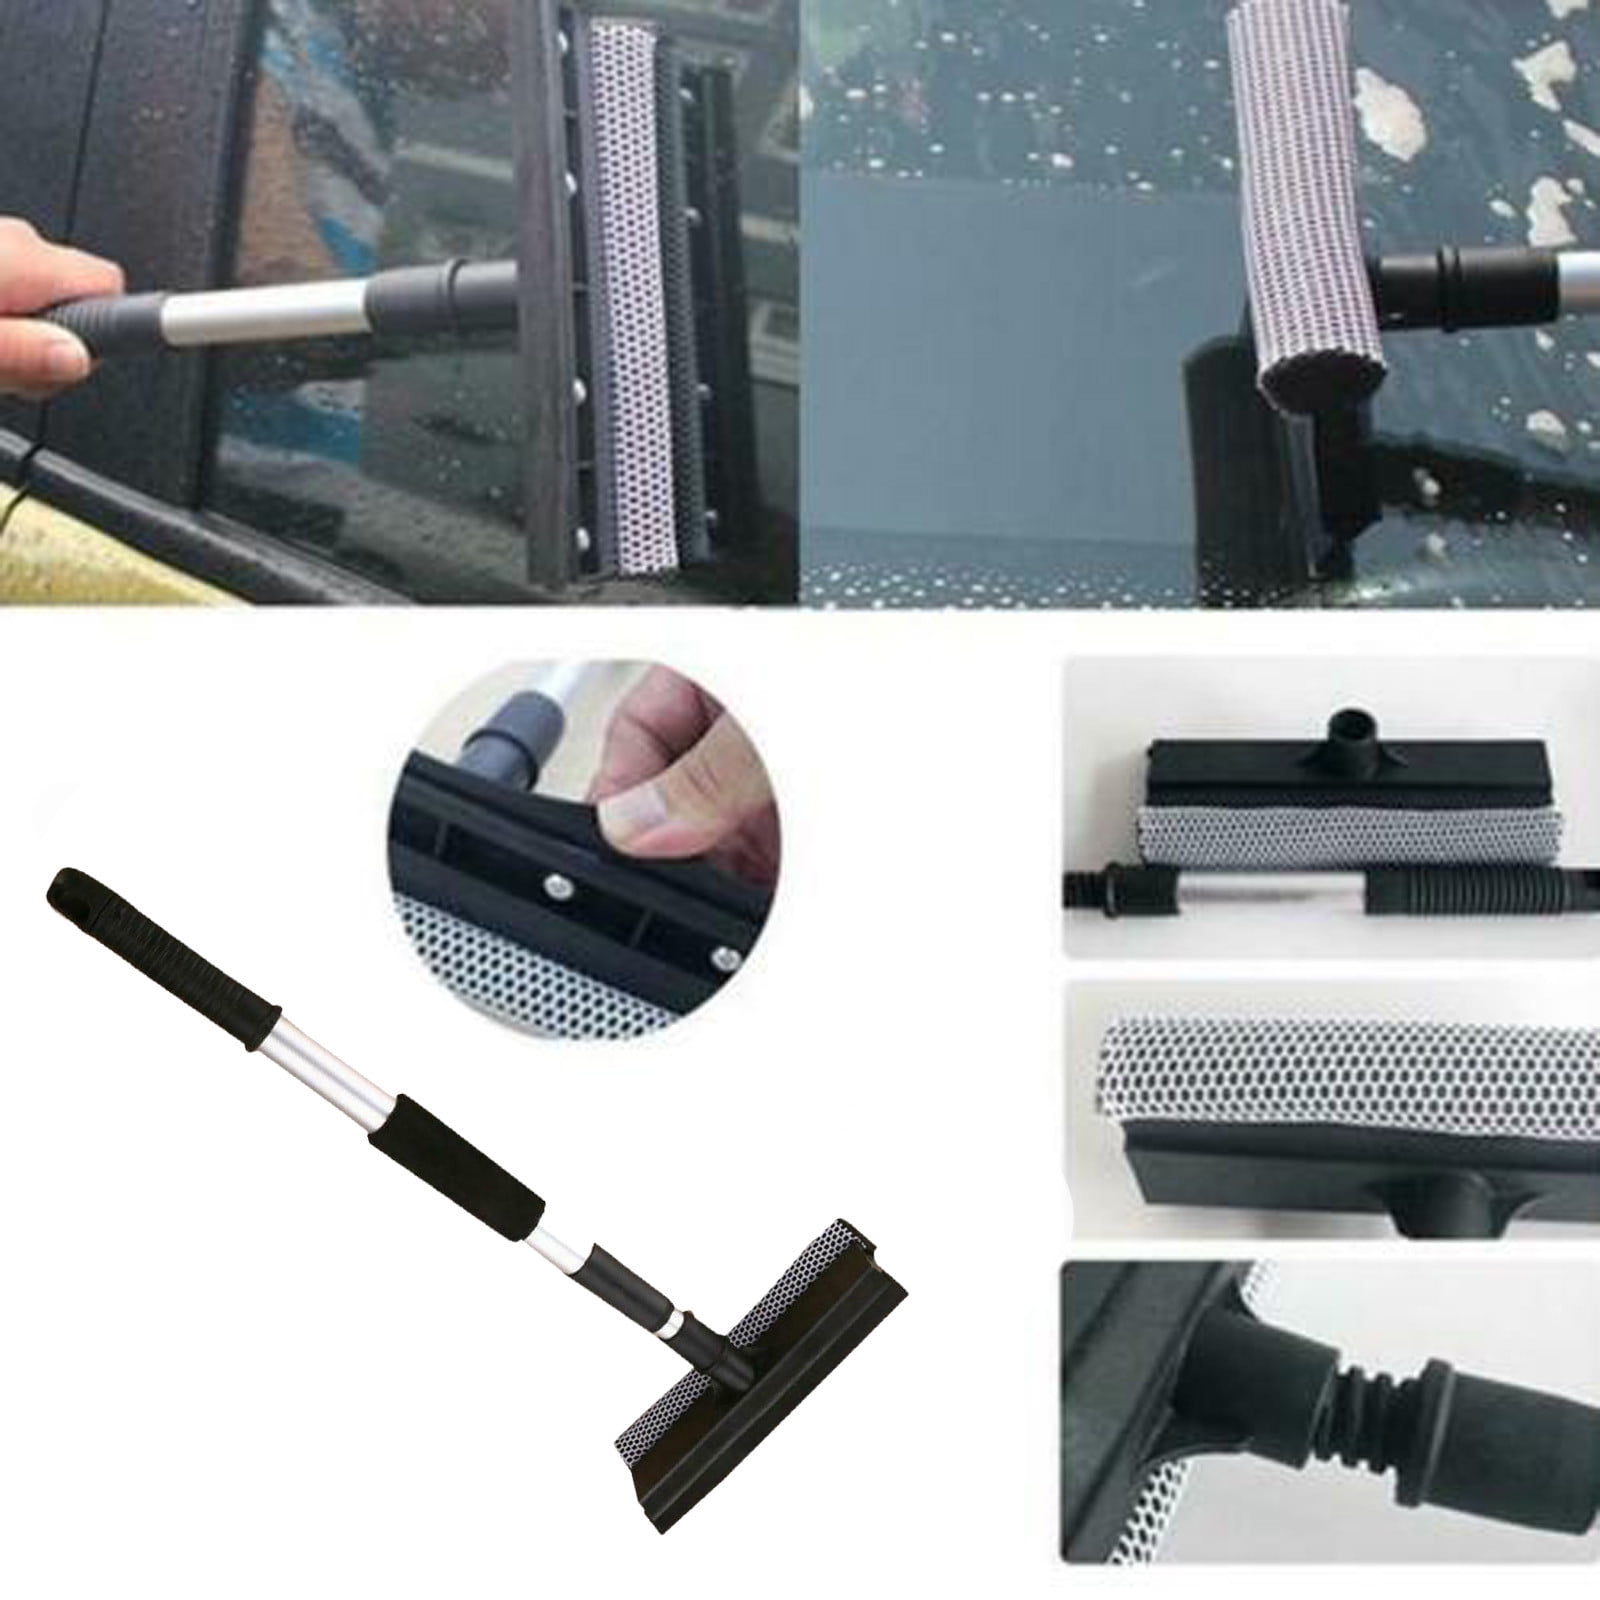 Multi-Use Window Squeegee, 2 in 1 Window Cleaner with Long